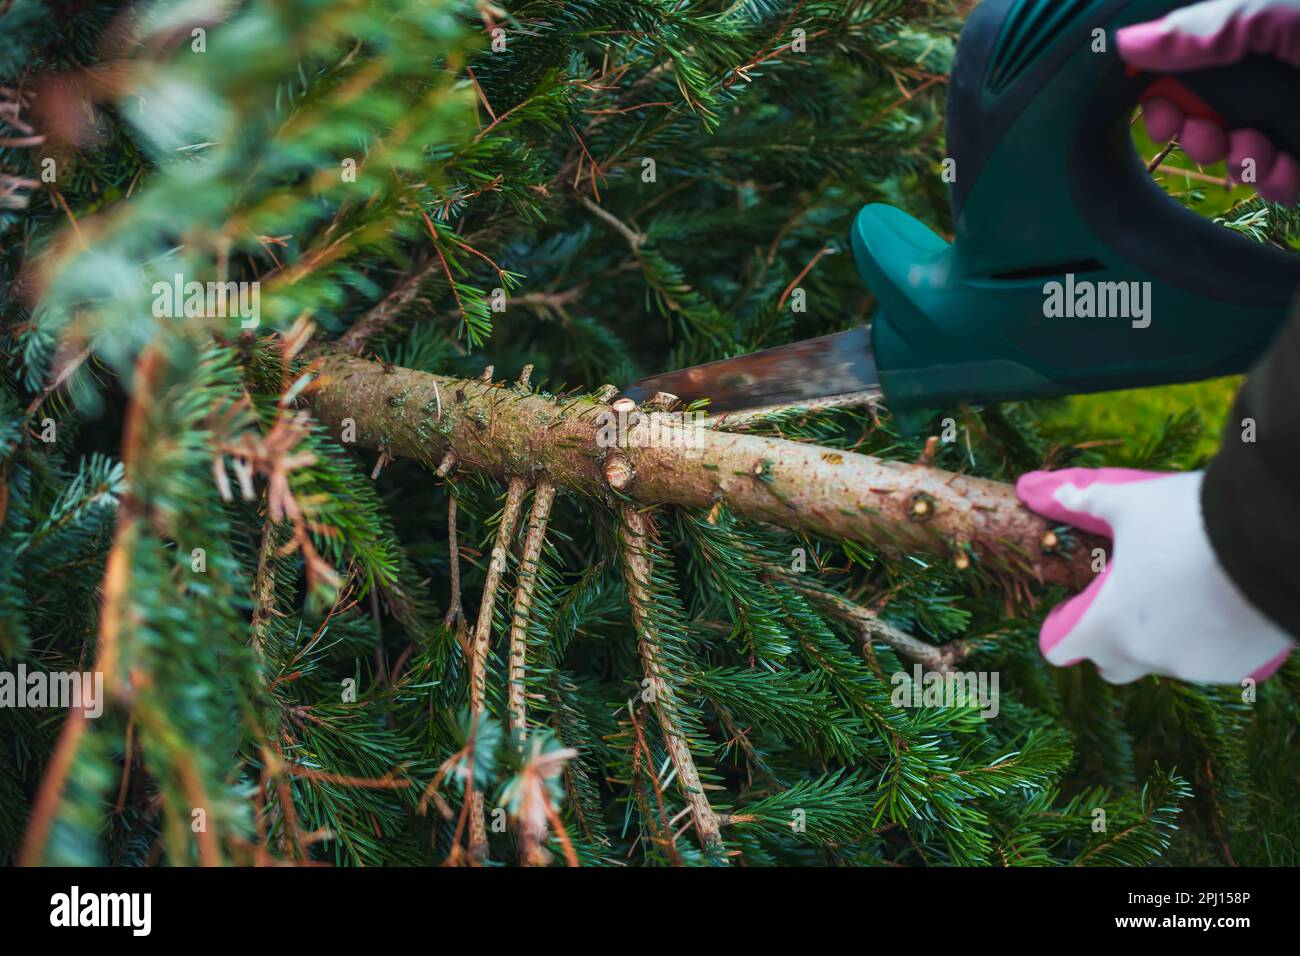 Gardening  work in autumn and winter. Teenager is sawing old Christmas tree with electric saw and cutting branches . Stock Photo